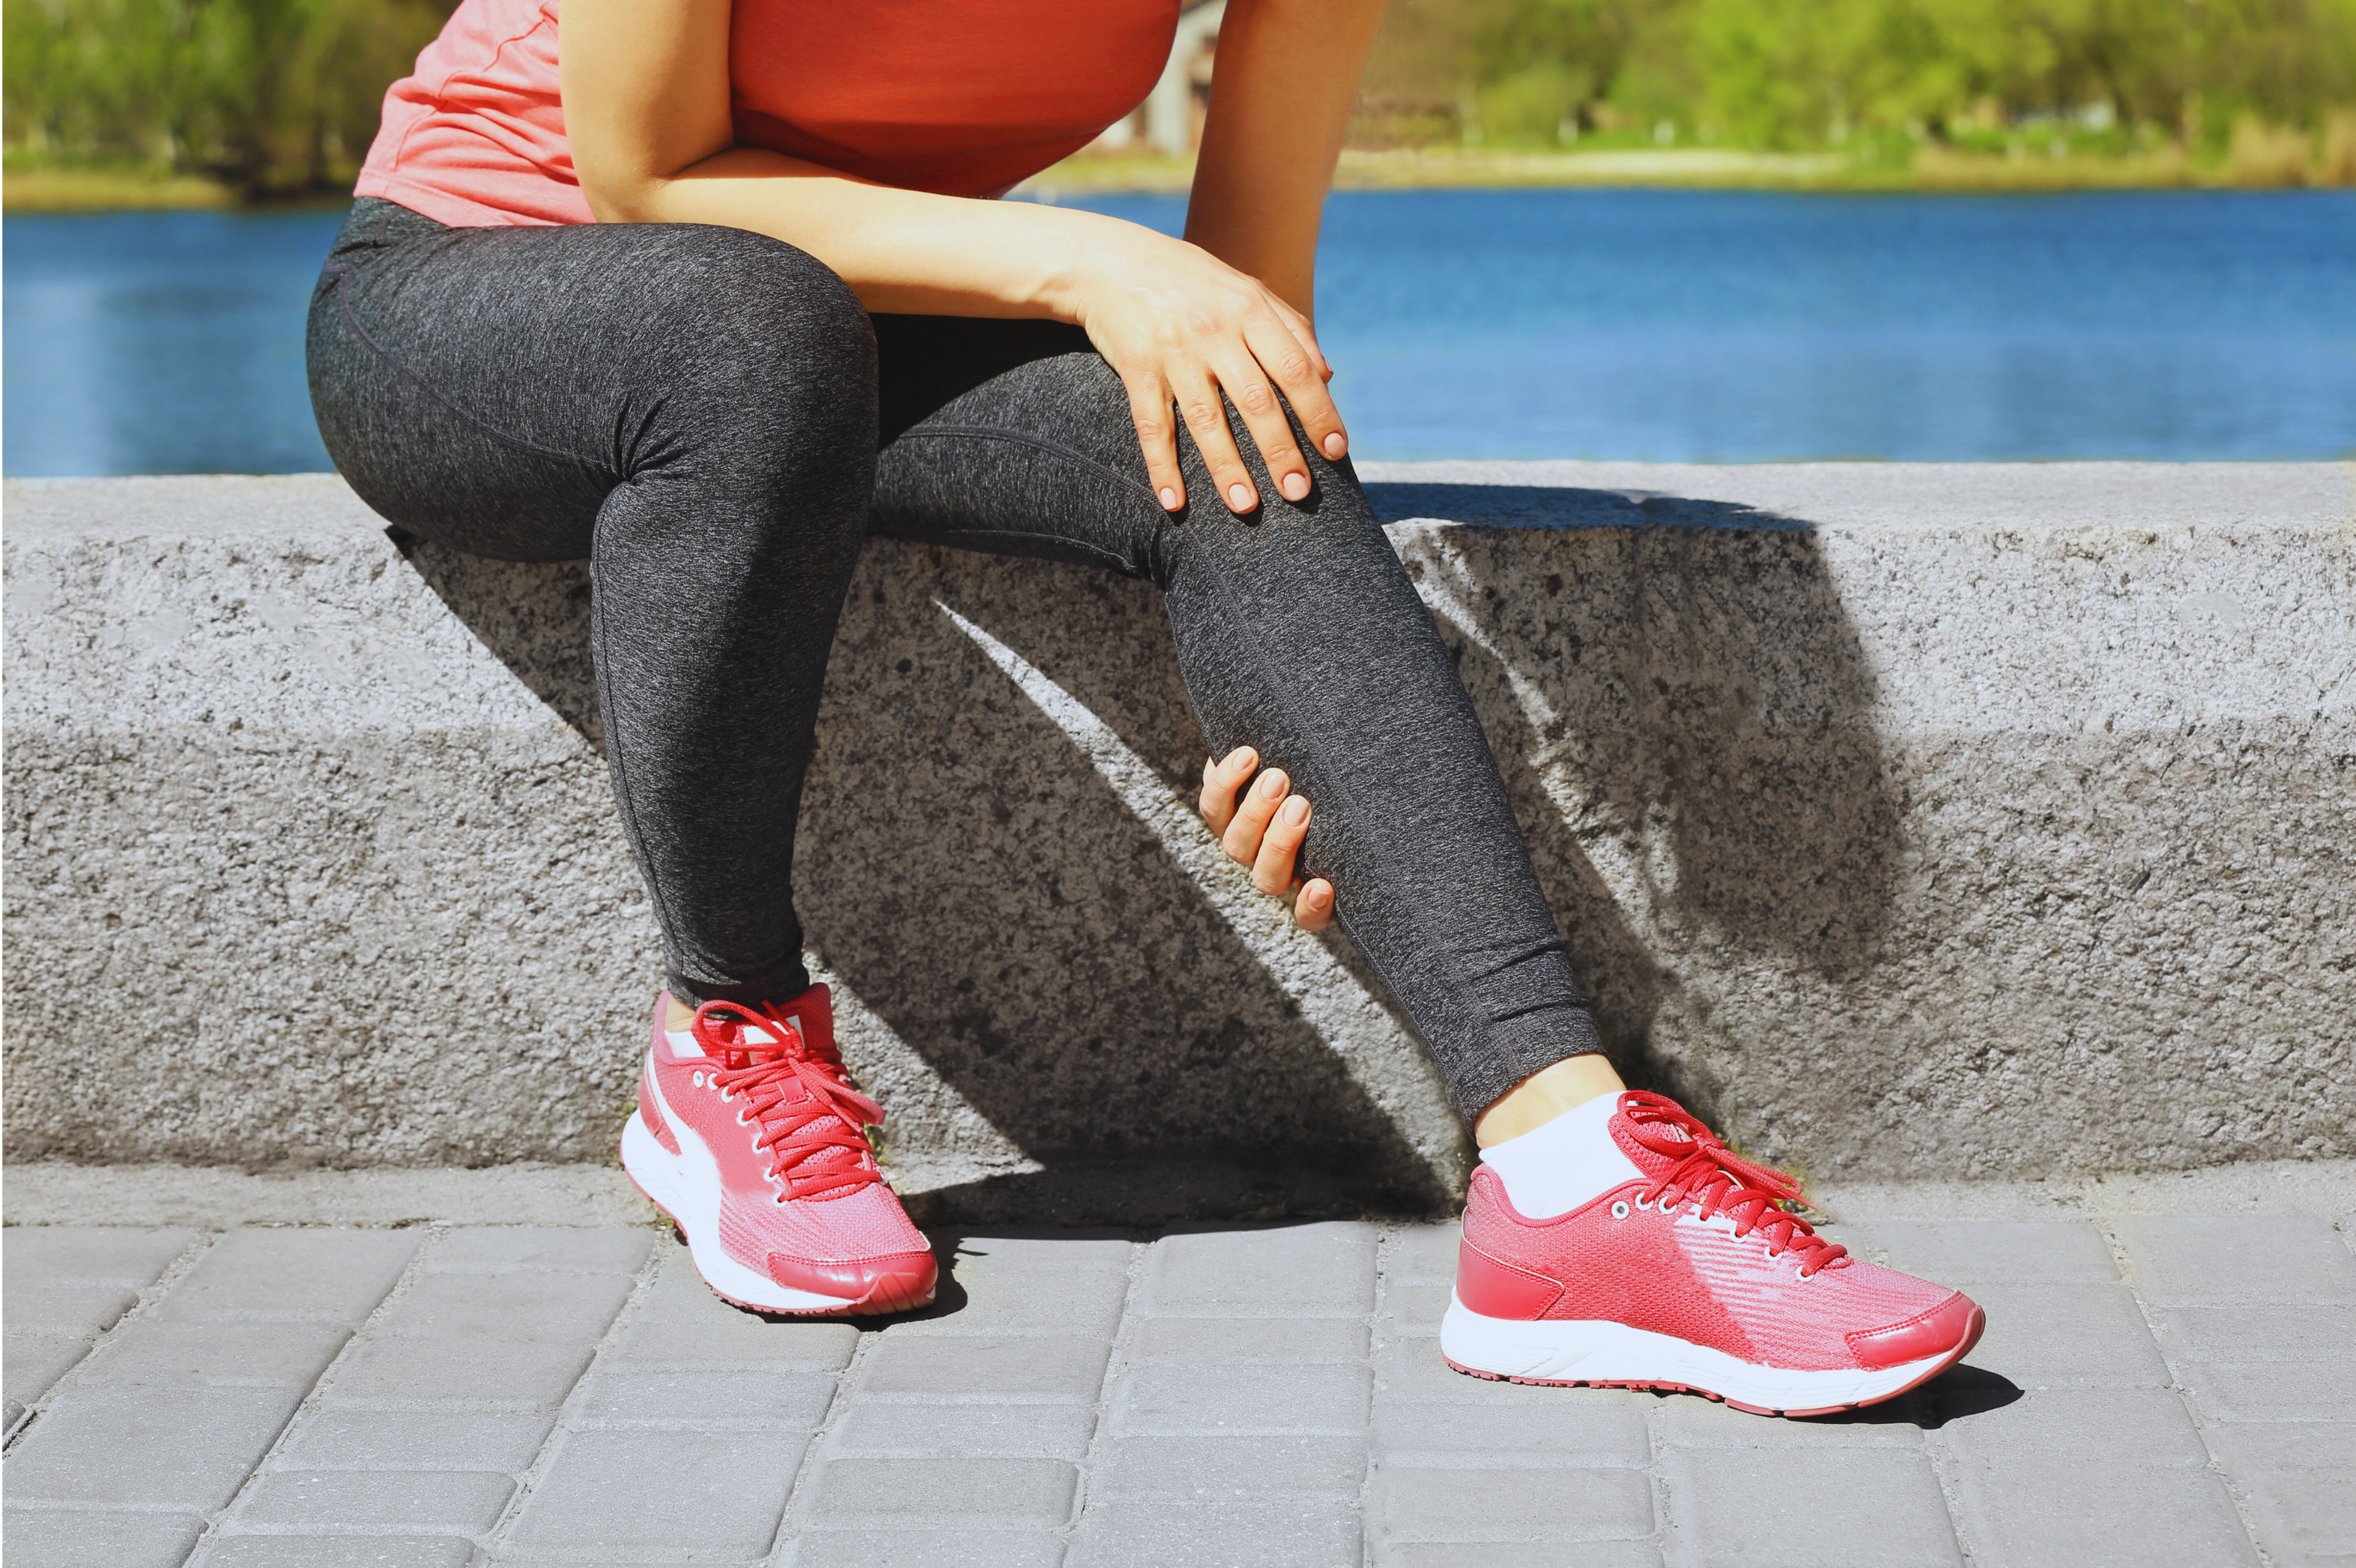 If the pain in your leg started before your foot became painful, it may not be plantar fasciitis.